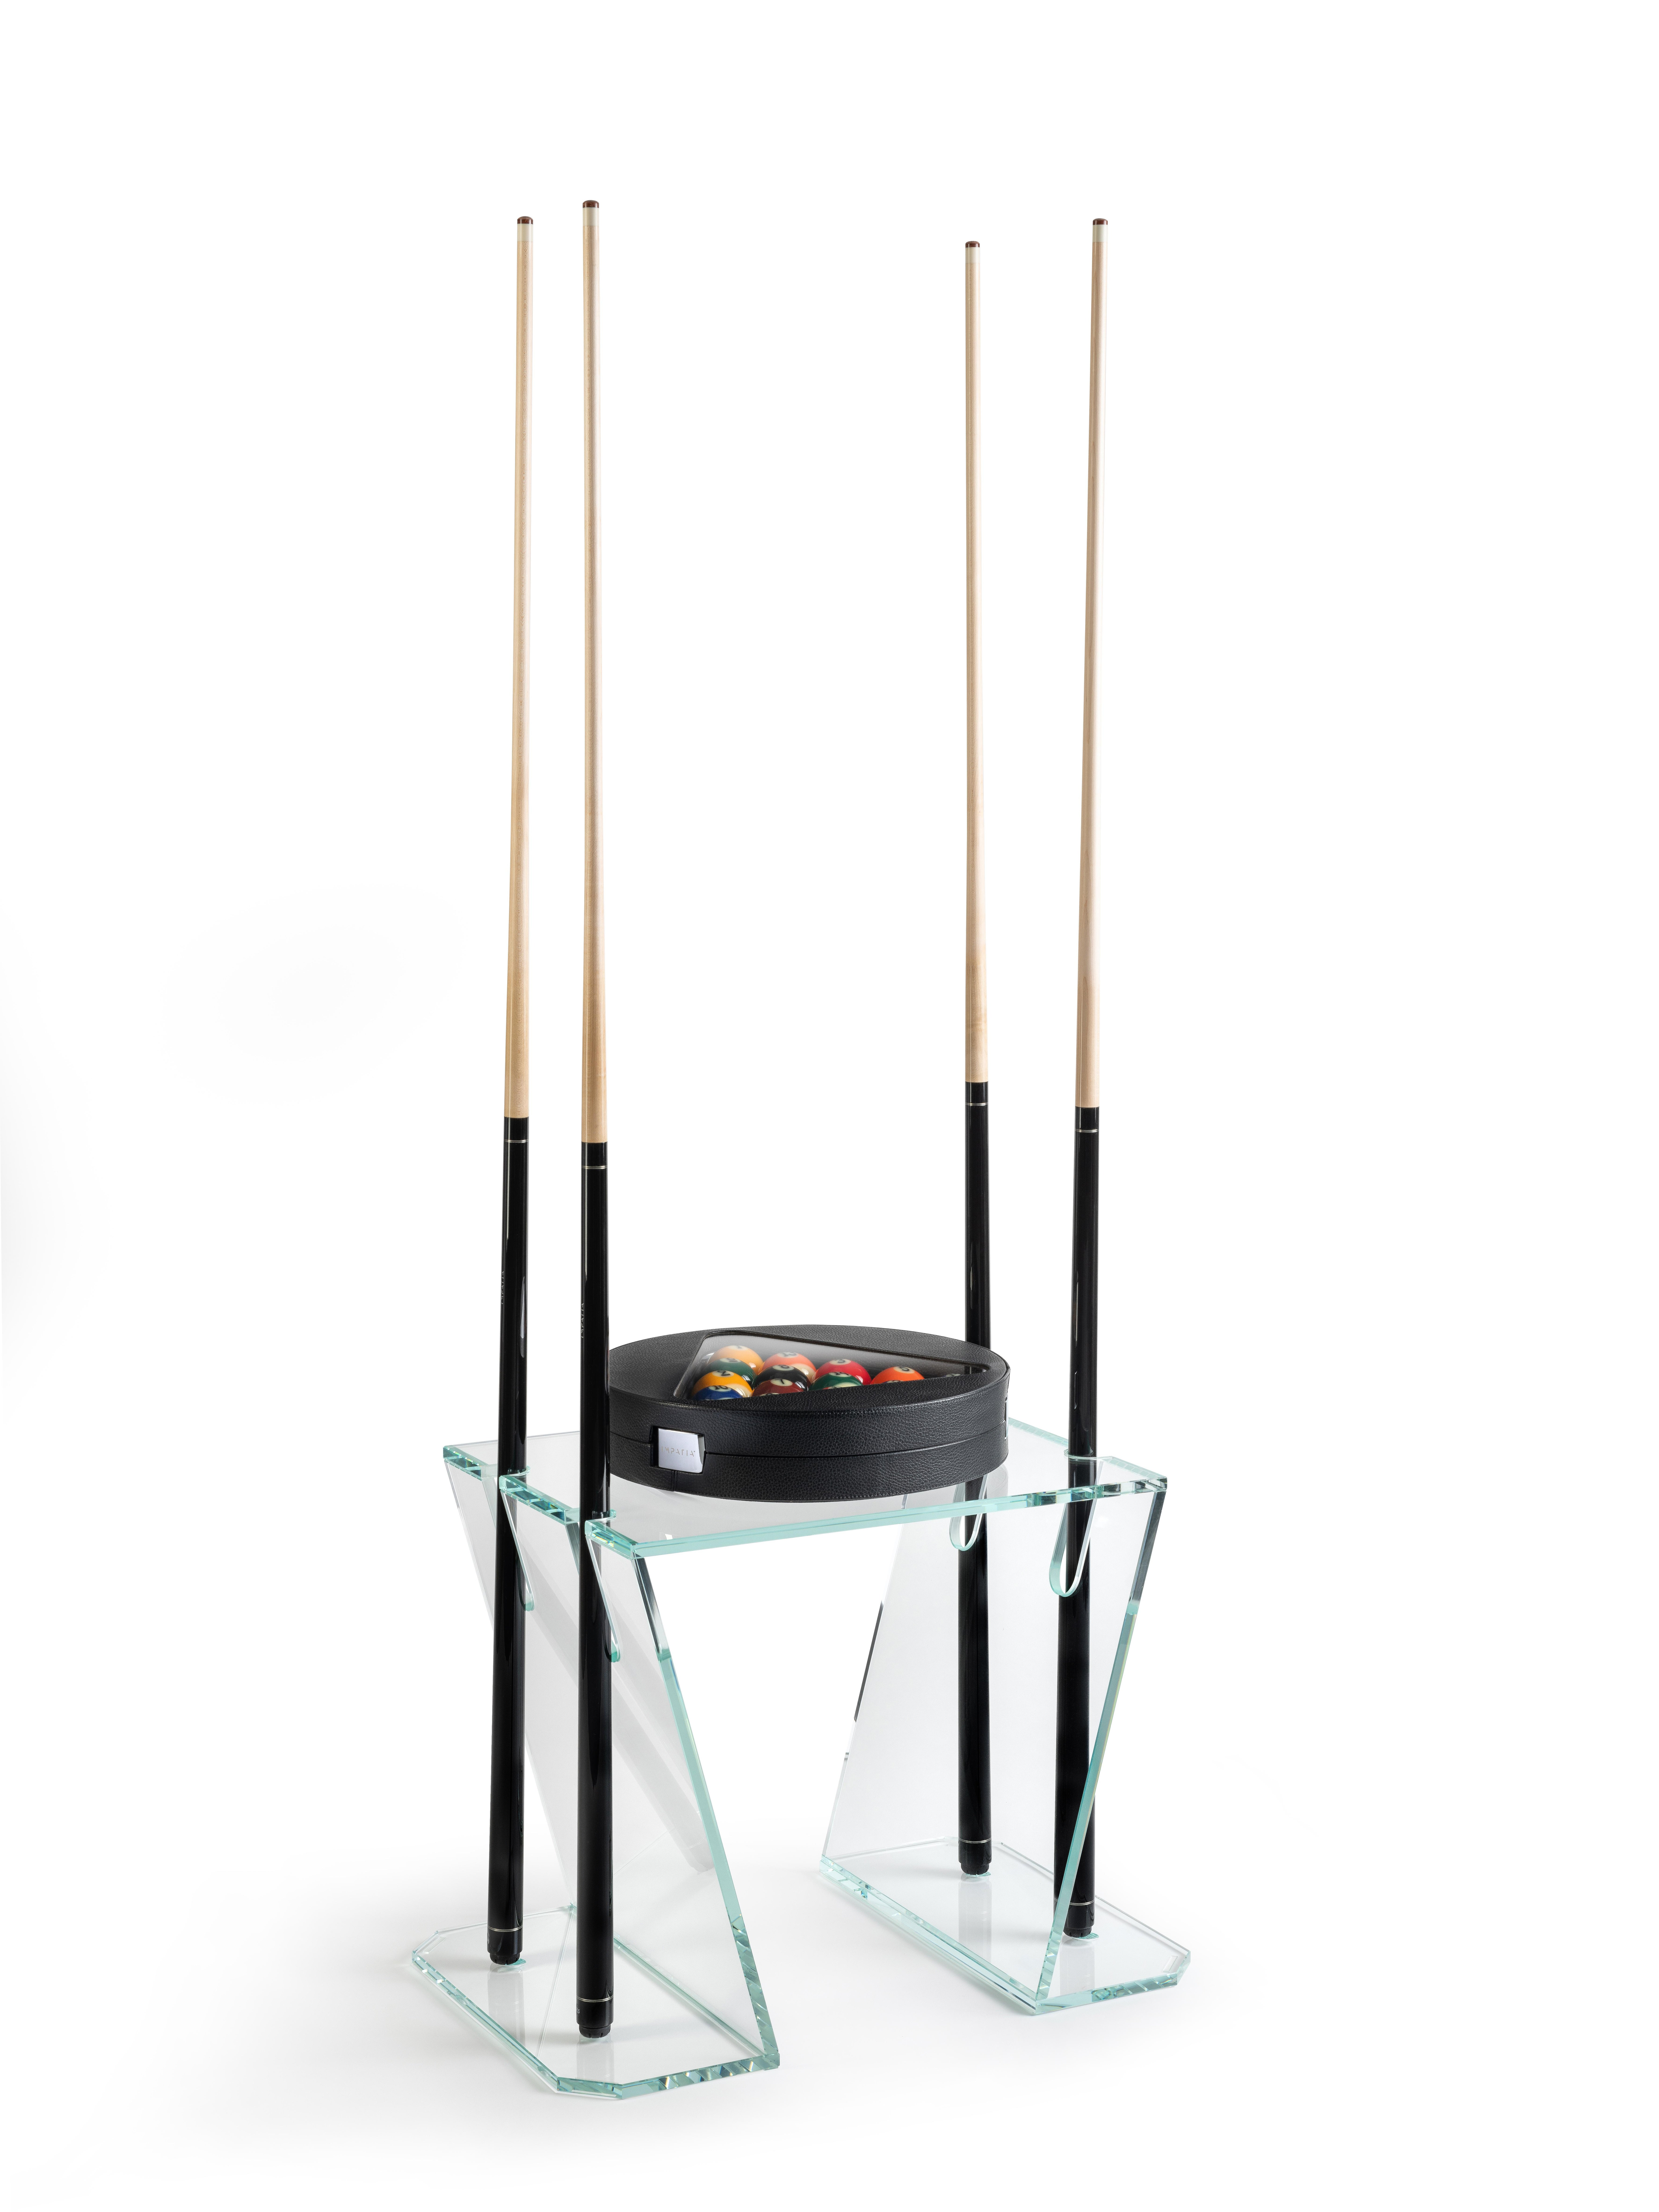 The Verso Glass Cue Stand not only serves as
a functional cue holder but also doubles as a magnificent
showcase for IMPATIA’s leather billiard ball set. Its
distinctive glass shape elegantly supports both Impatia’s
Italian cues and game set,